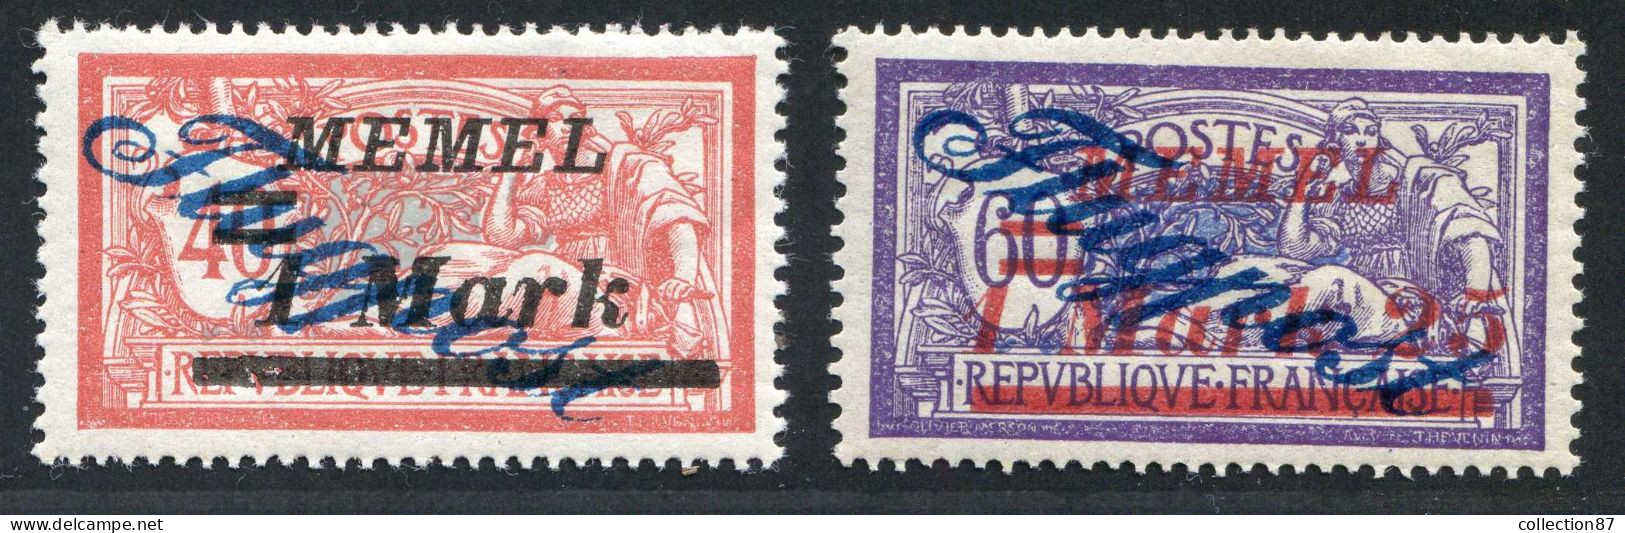 REF 088 > MEMEL FLUGPOST < PA N° 10 + 11 * Neuf Ch Dos Visible - MH * > Air Mail - Aéro - Nuovi